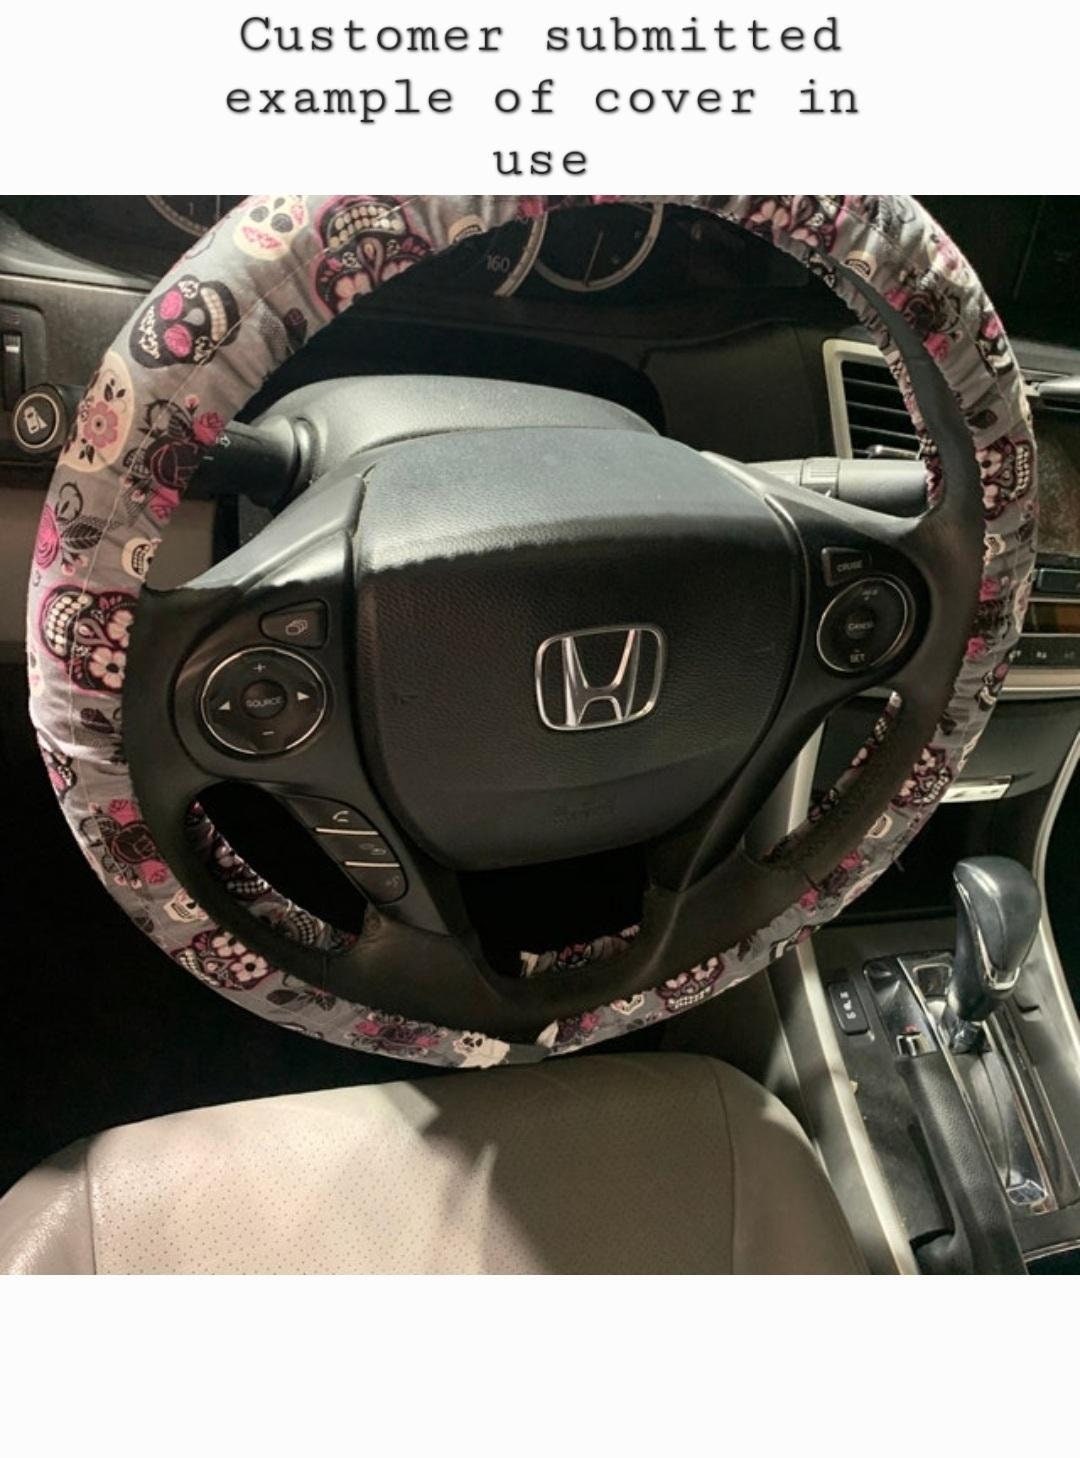 Beet Farm Steering Wheel Cover made with Licensed Fabric